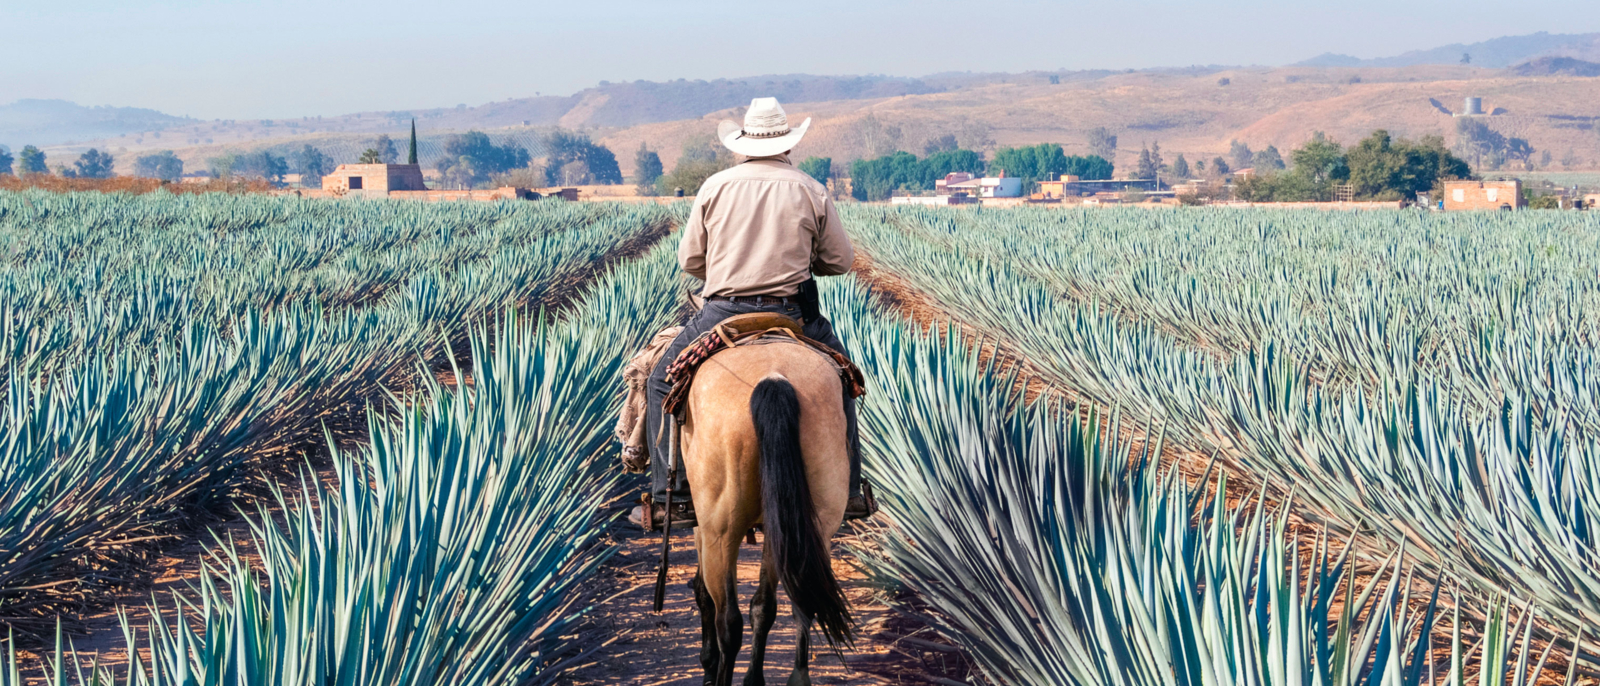 Farmer on his horse walking in his agave seed. Agave landscape, Tequila, Jalisco, Mexico.